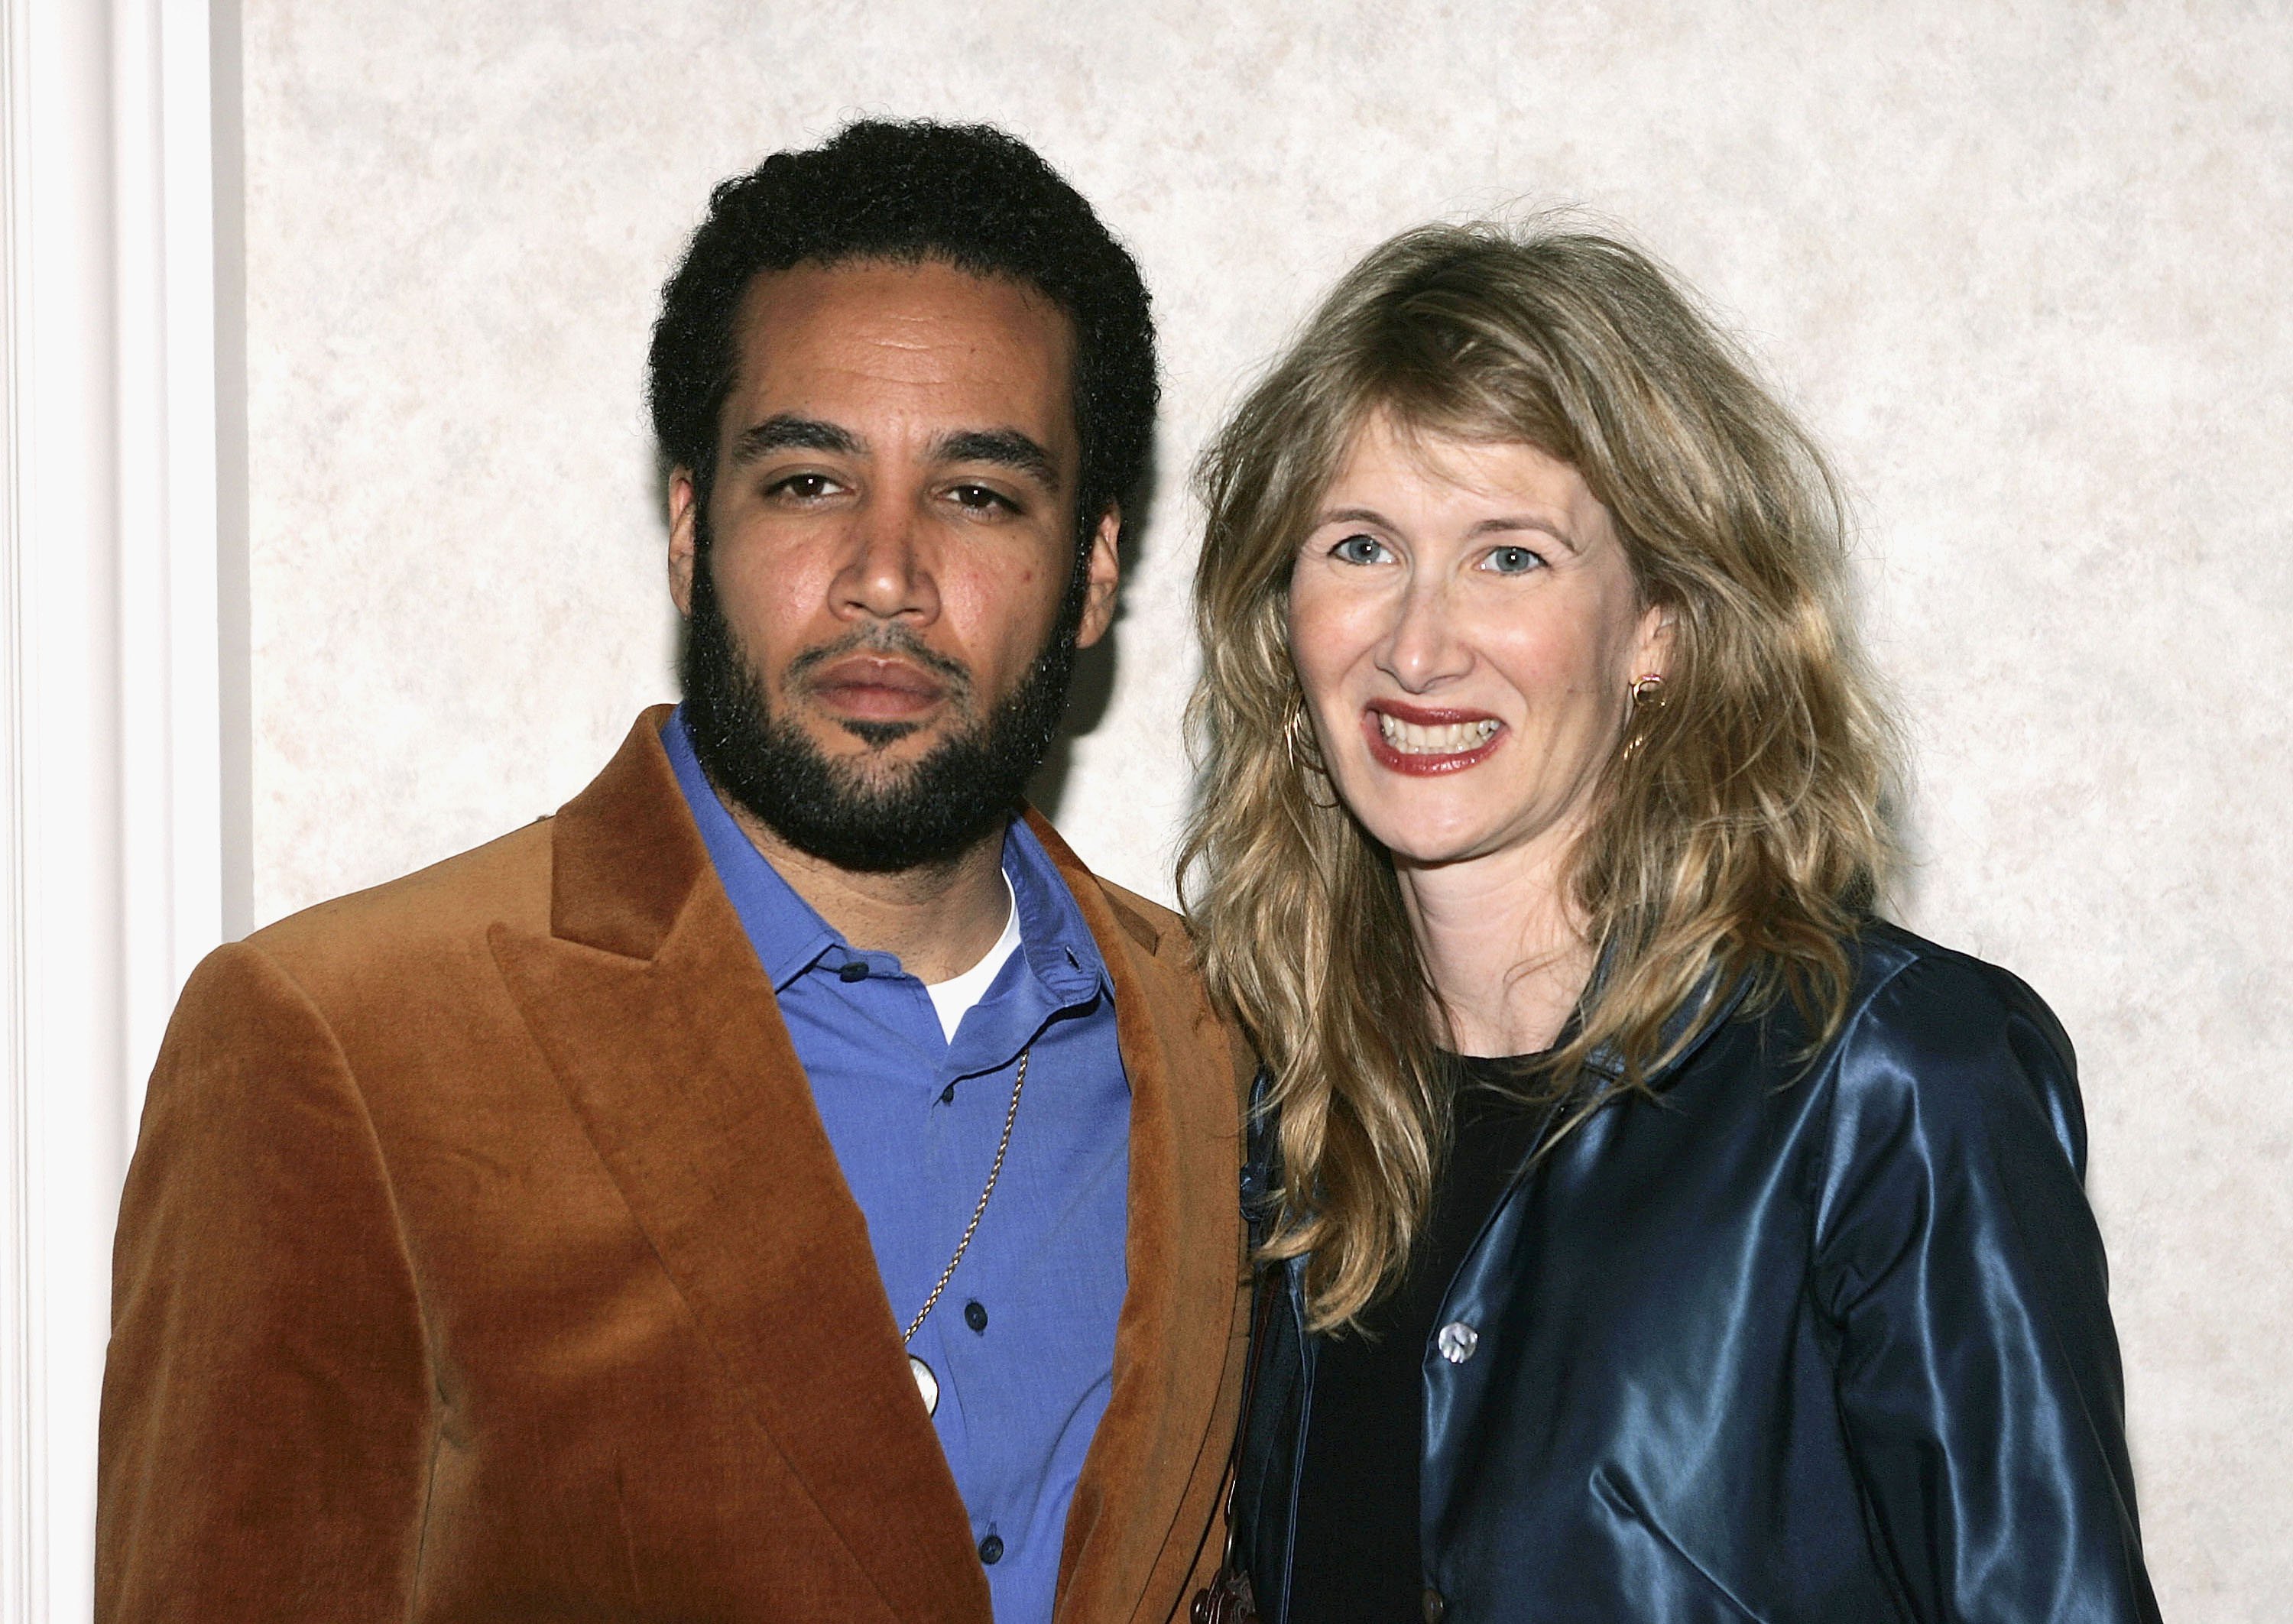 Ben Harper and Laura Dern on March 17, 2005 in Beverly Hills, California | Source: Getty Images 